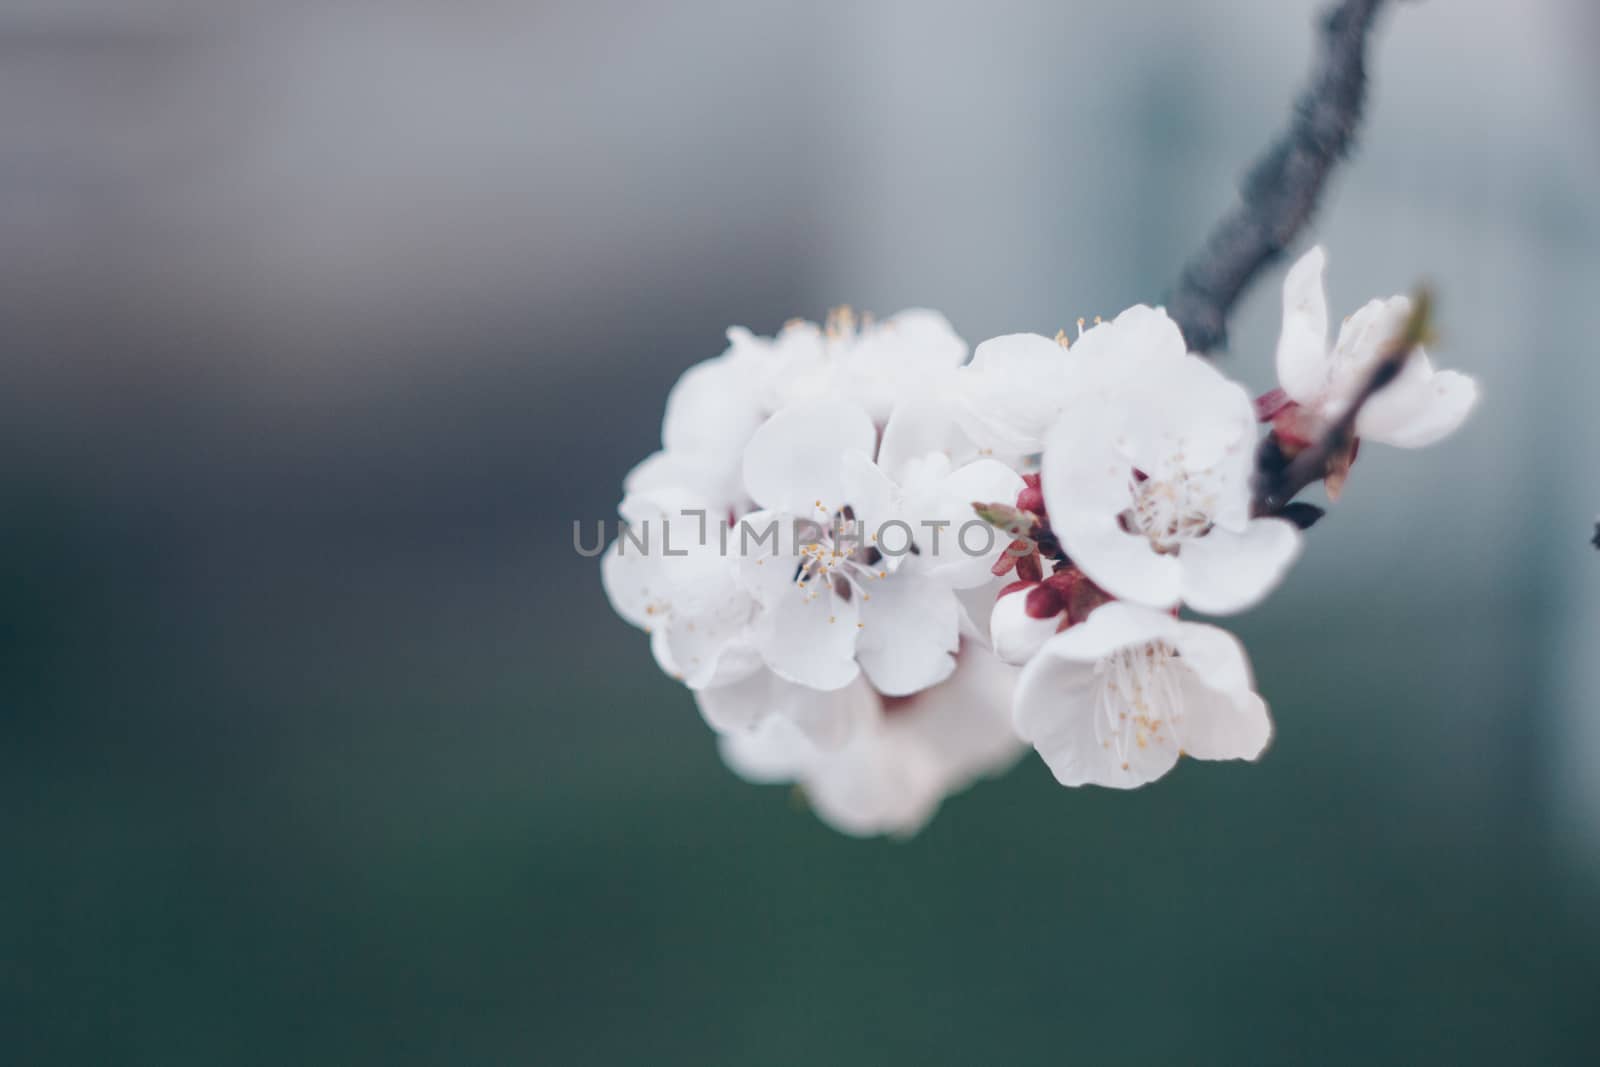 blooming tree in spring close up white flowers buds growing leaves twigs revival of nature by yulaphotographer